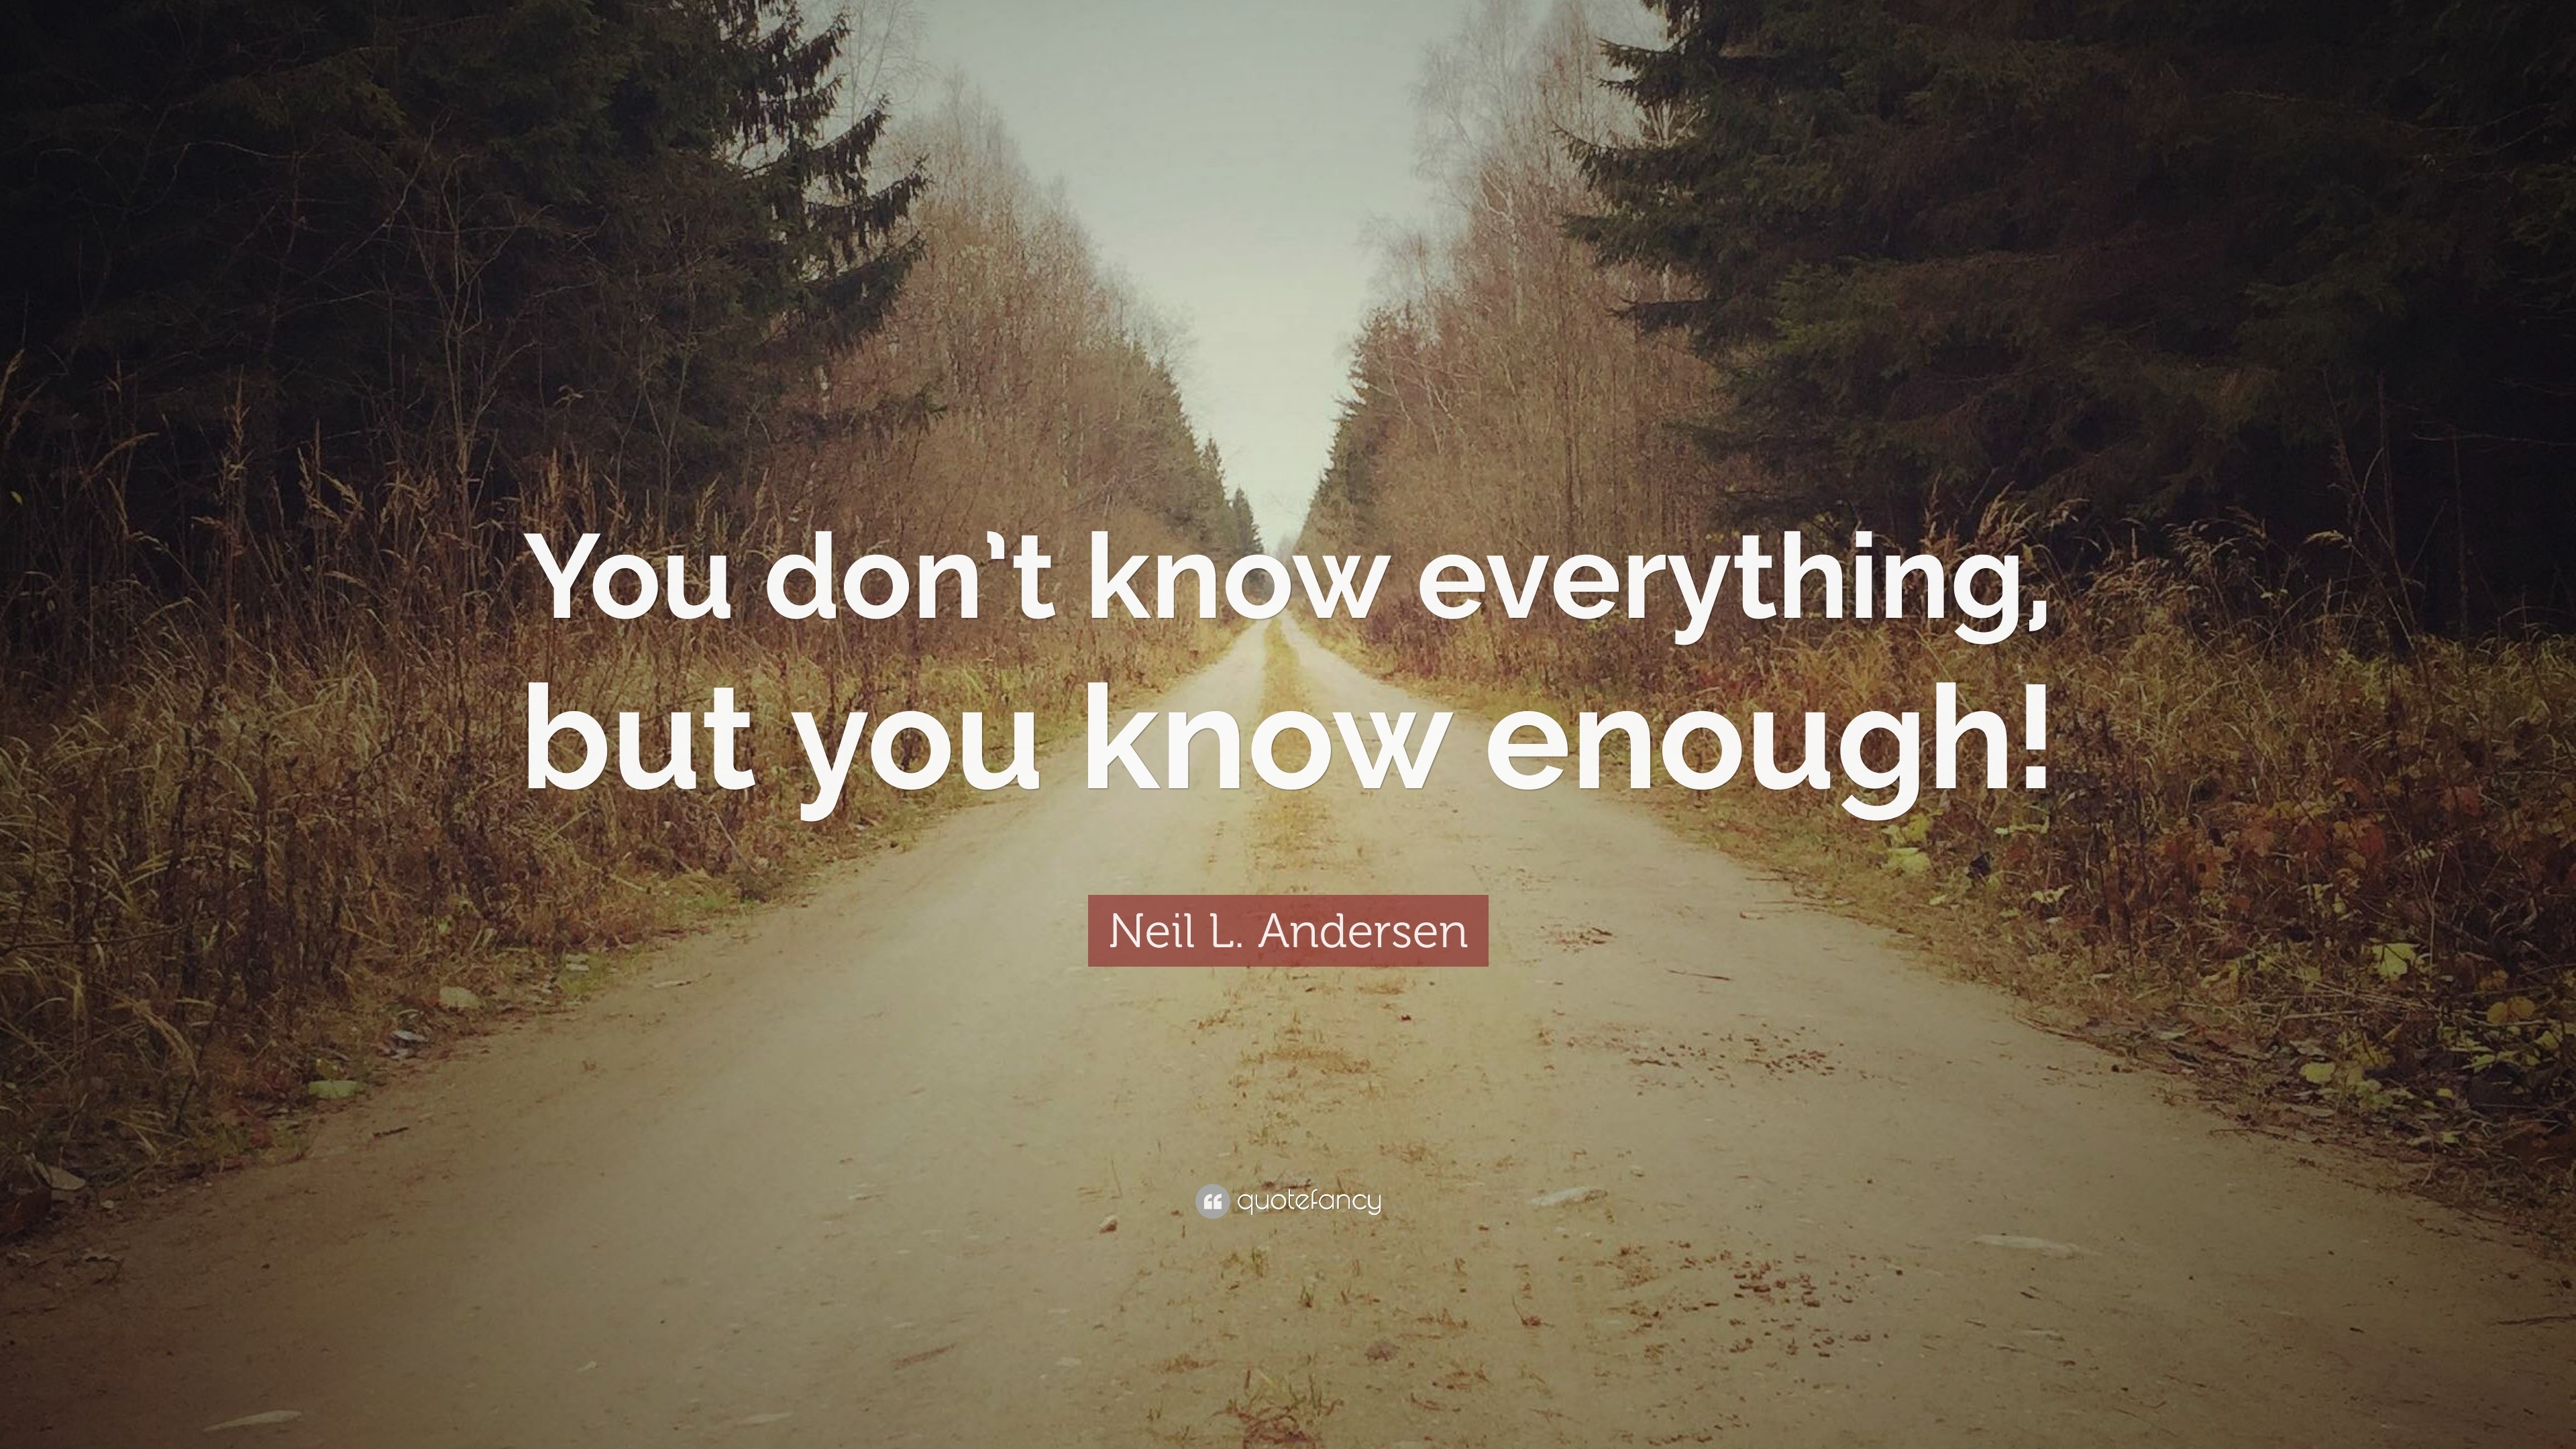 Neil L. Andersen Quote: “You don’t know everything, but you know enough!”